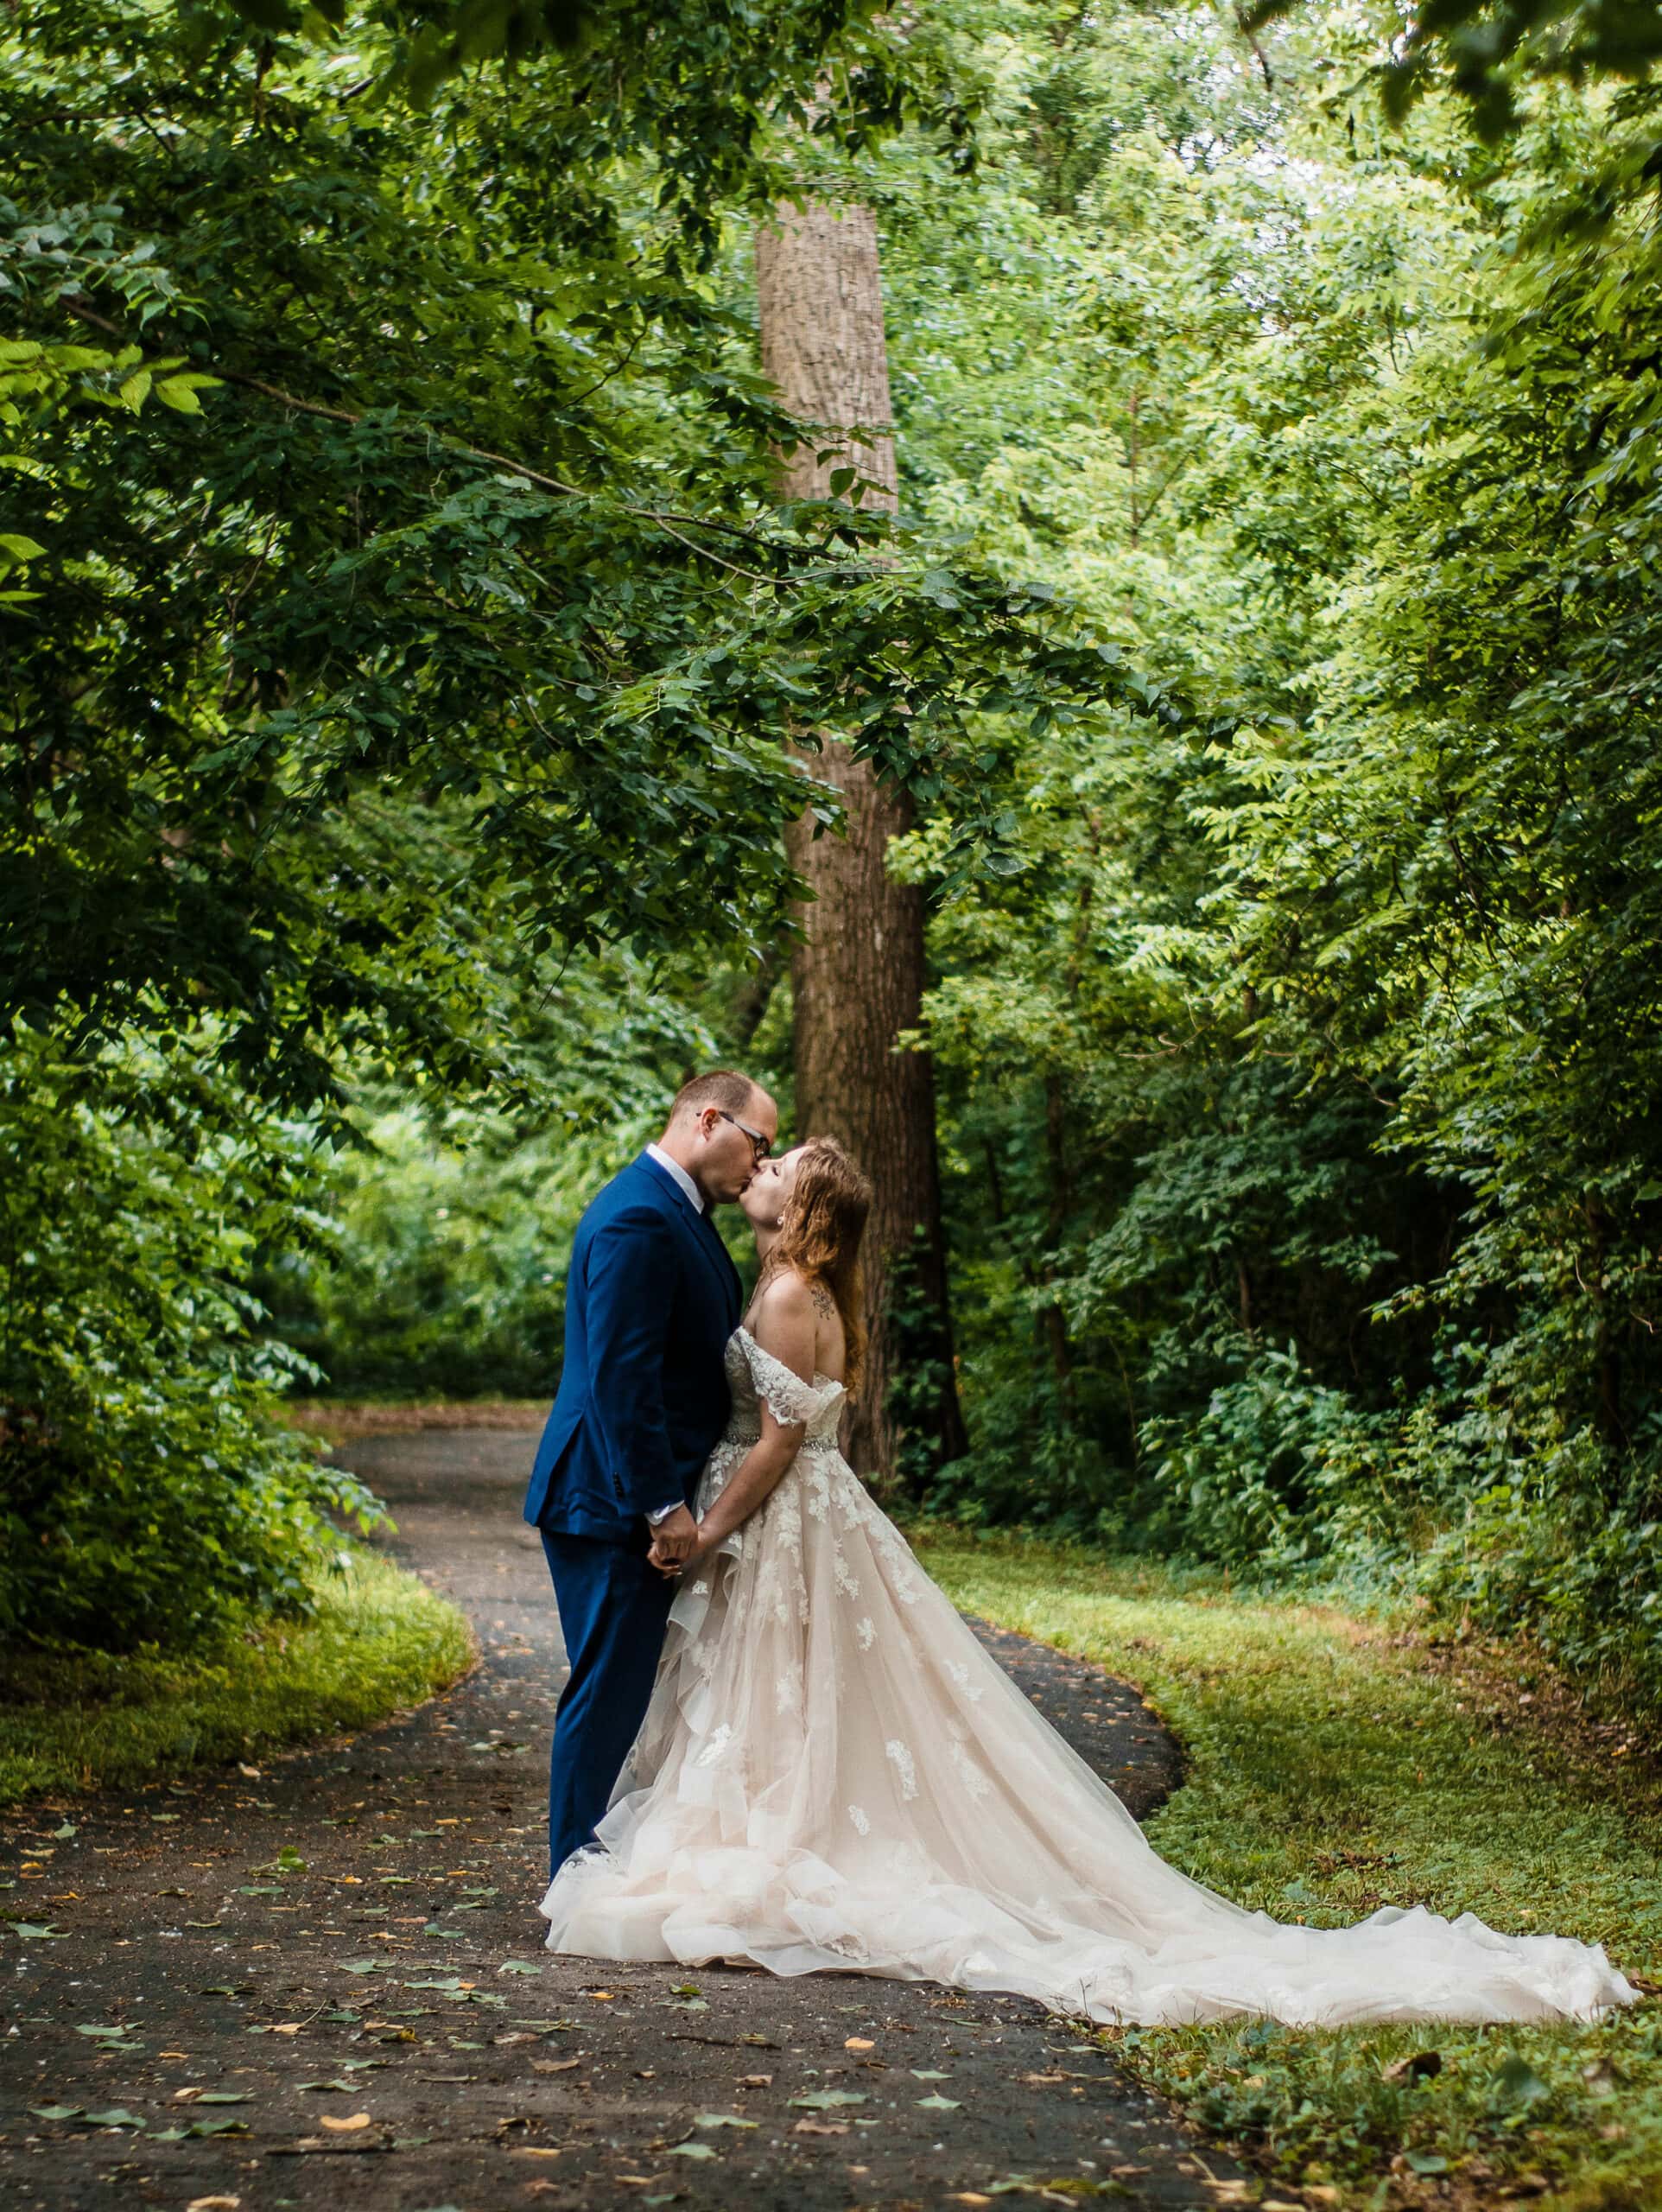 couple kisses under trees at outdoor elopement location